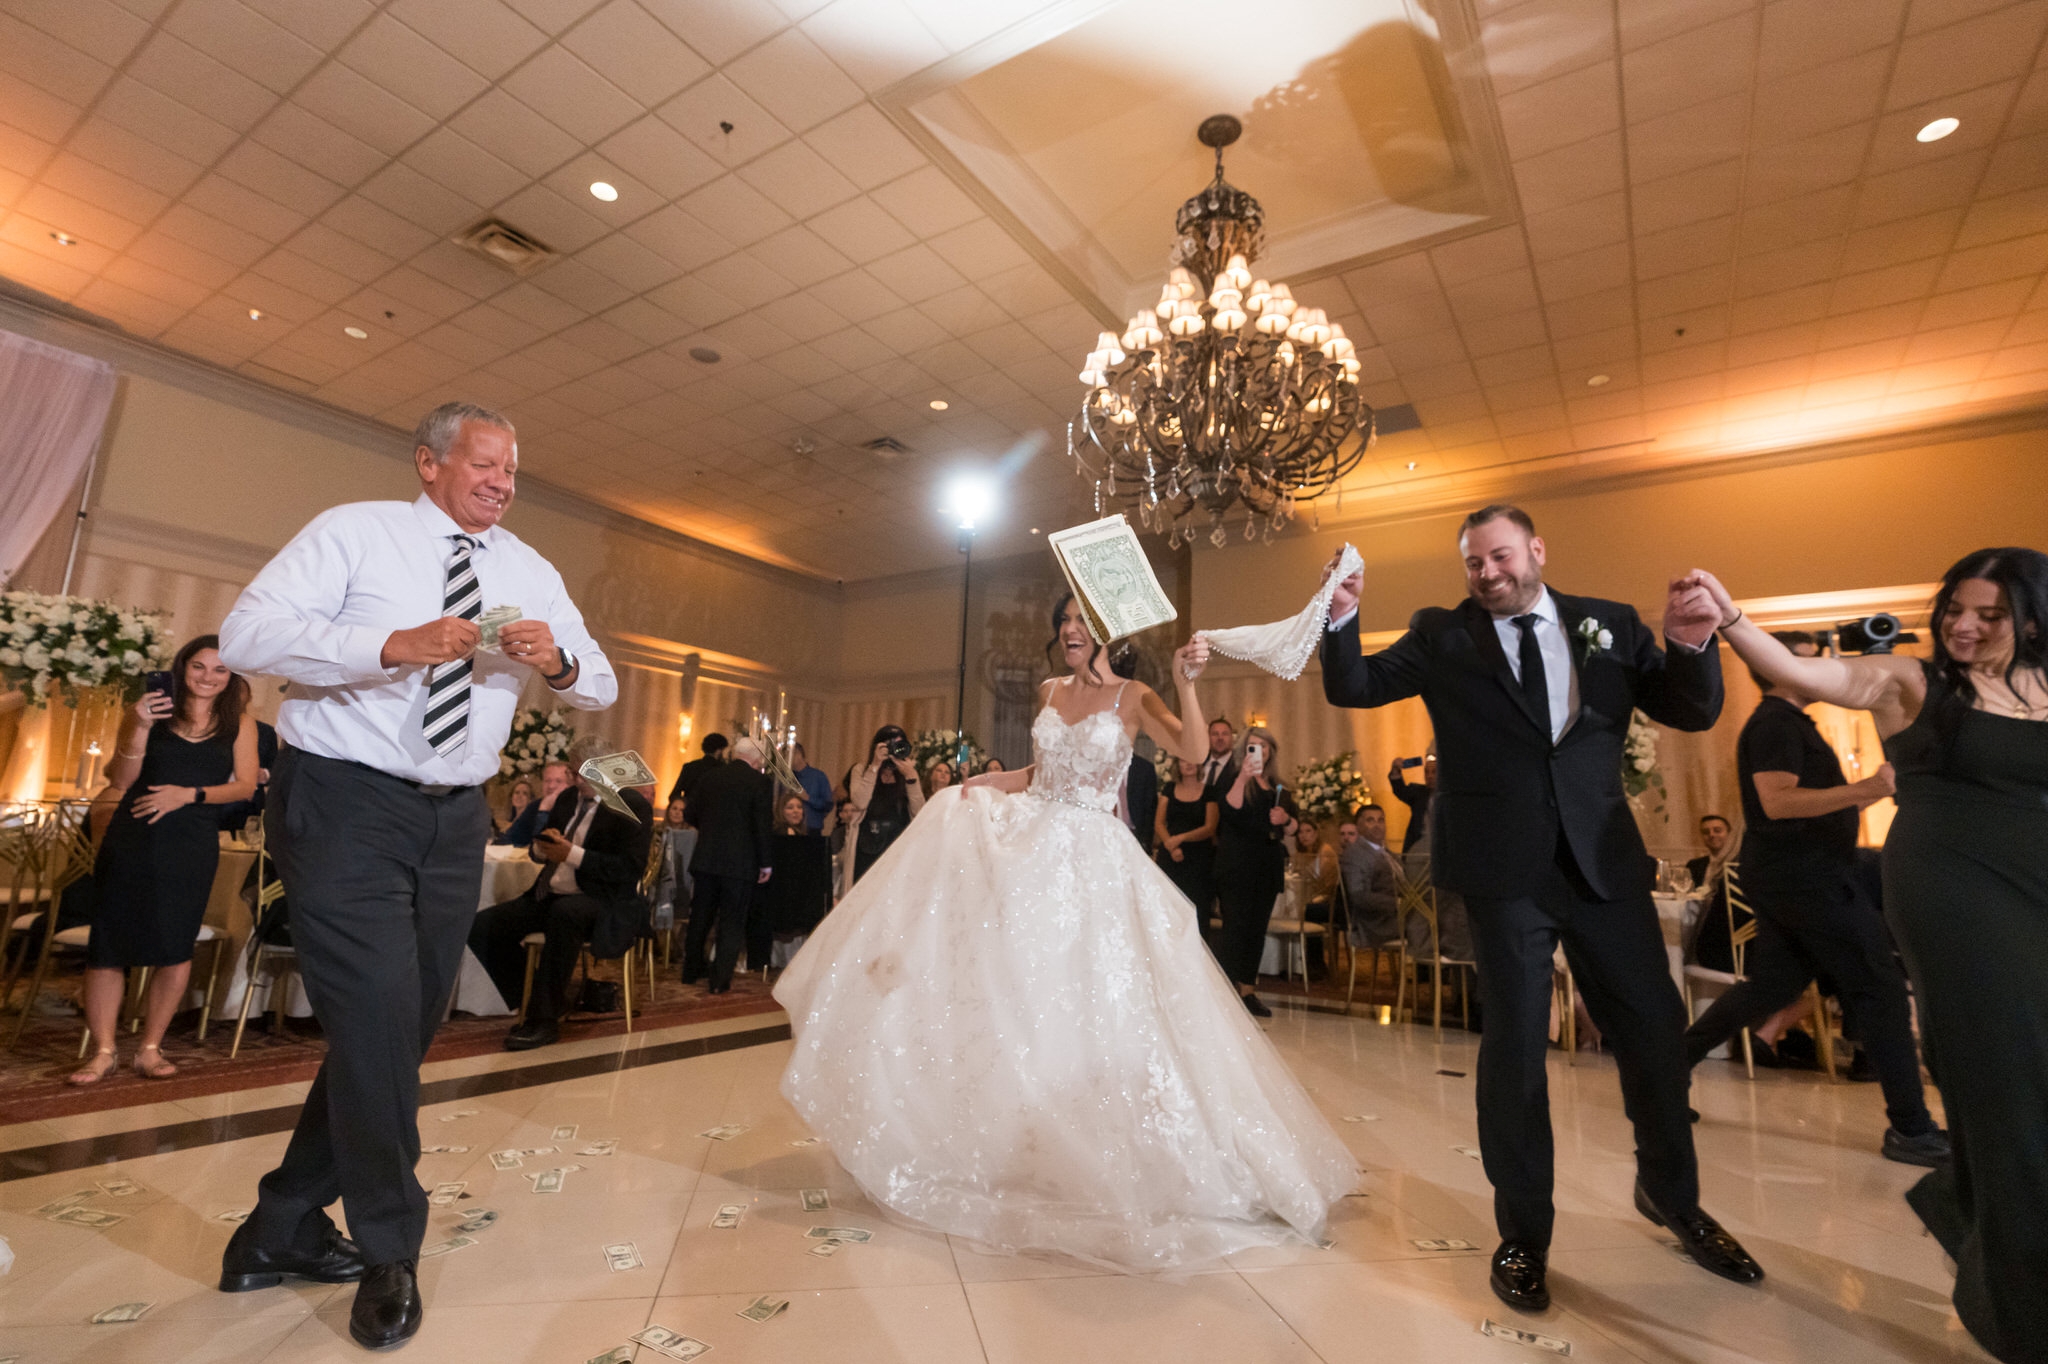 A Greek wedding dance takes place at Palazzo Grande wedding reception in Shelby Township, MI.  